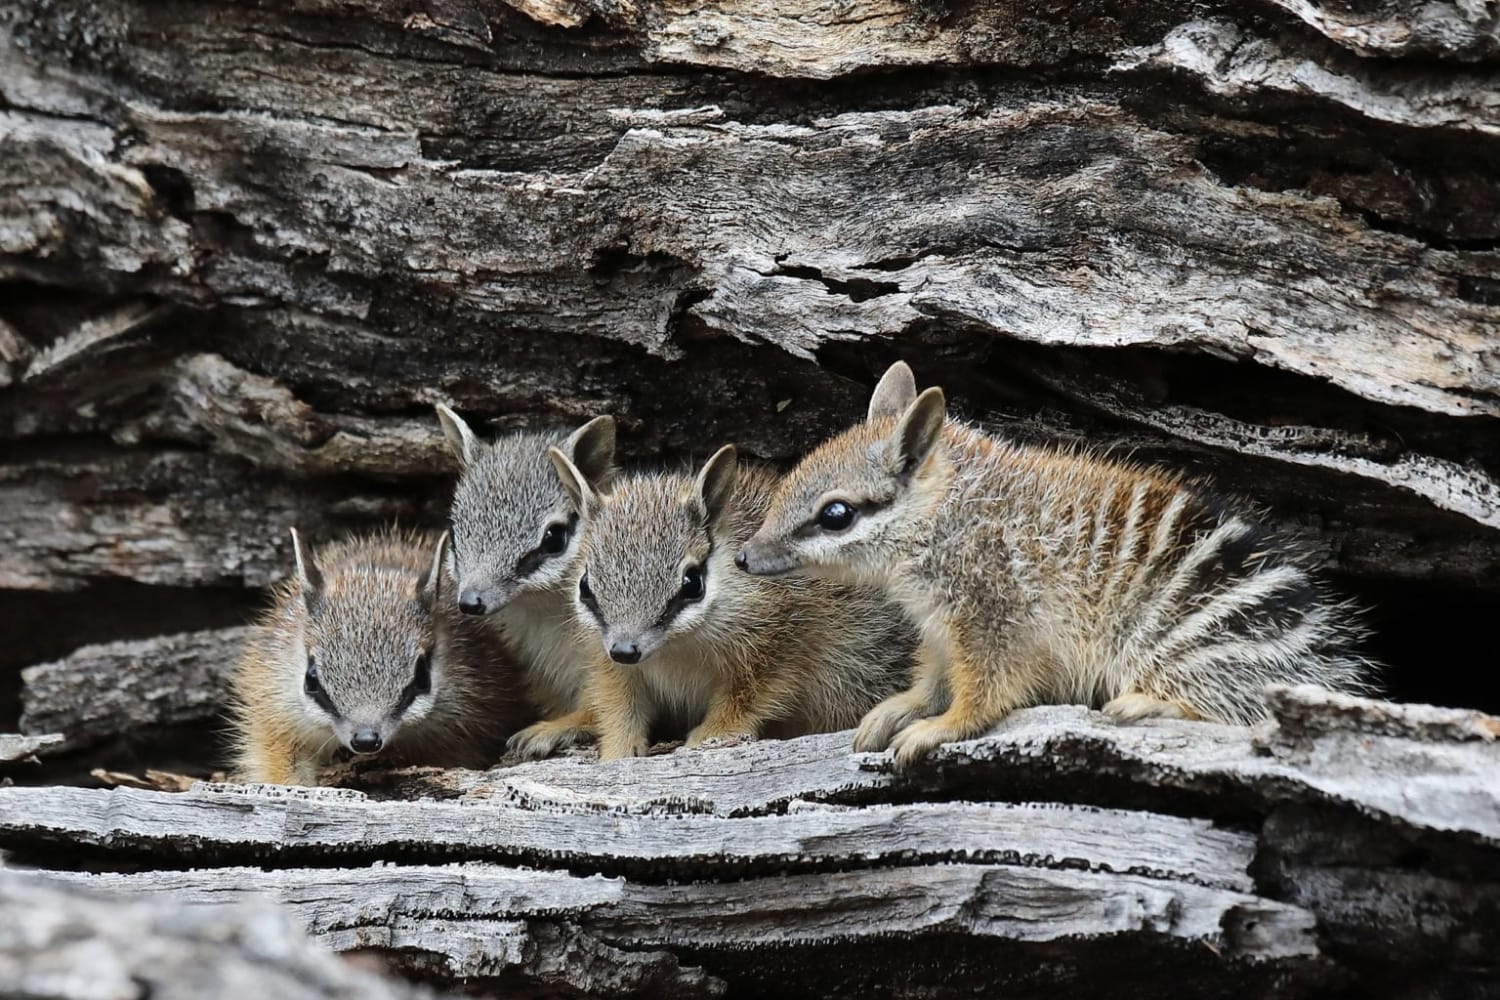 The Numbat aka the banded anteater, is a small pouchless insect-eating marsupial native to Australia. It grows to about 29.5-50 cm including its bushy tail. Numbat has a long sticky tongue that allows it to pick up termites, which is its primary diet. An adult numbat needs up to 20K termites daily.